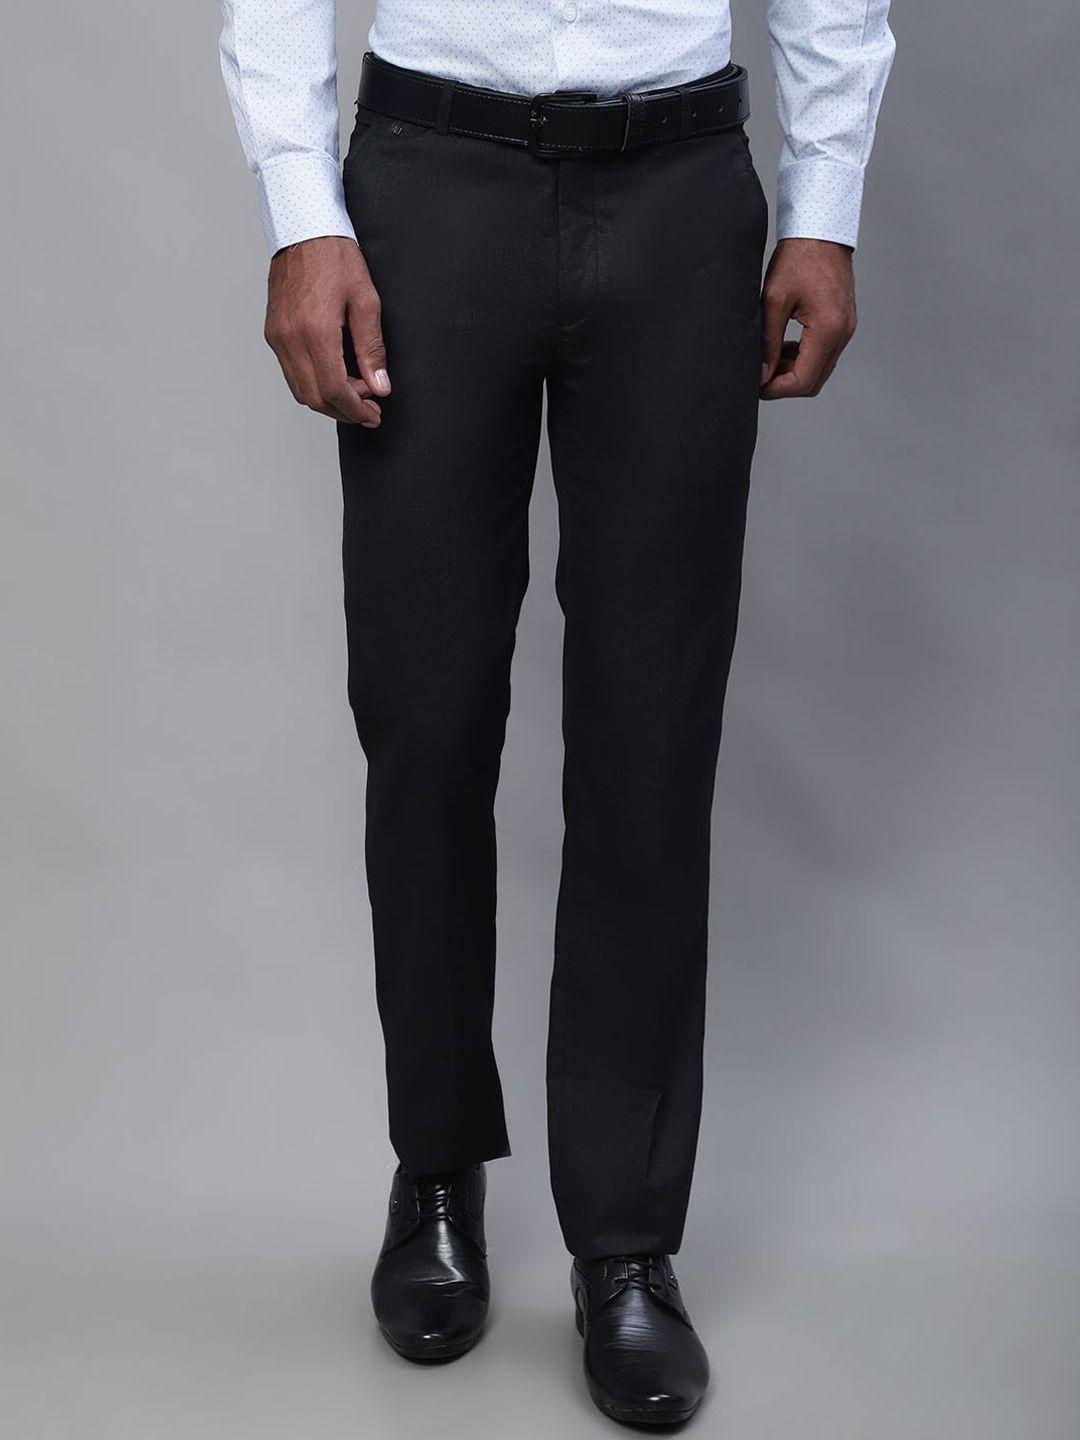 cantabil-men-mid-rise-formal-trousers